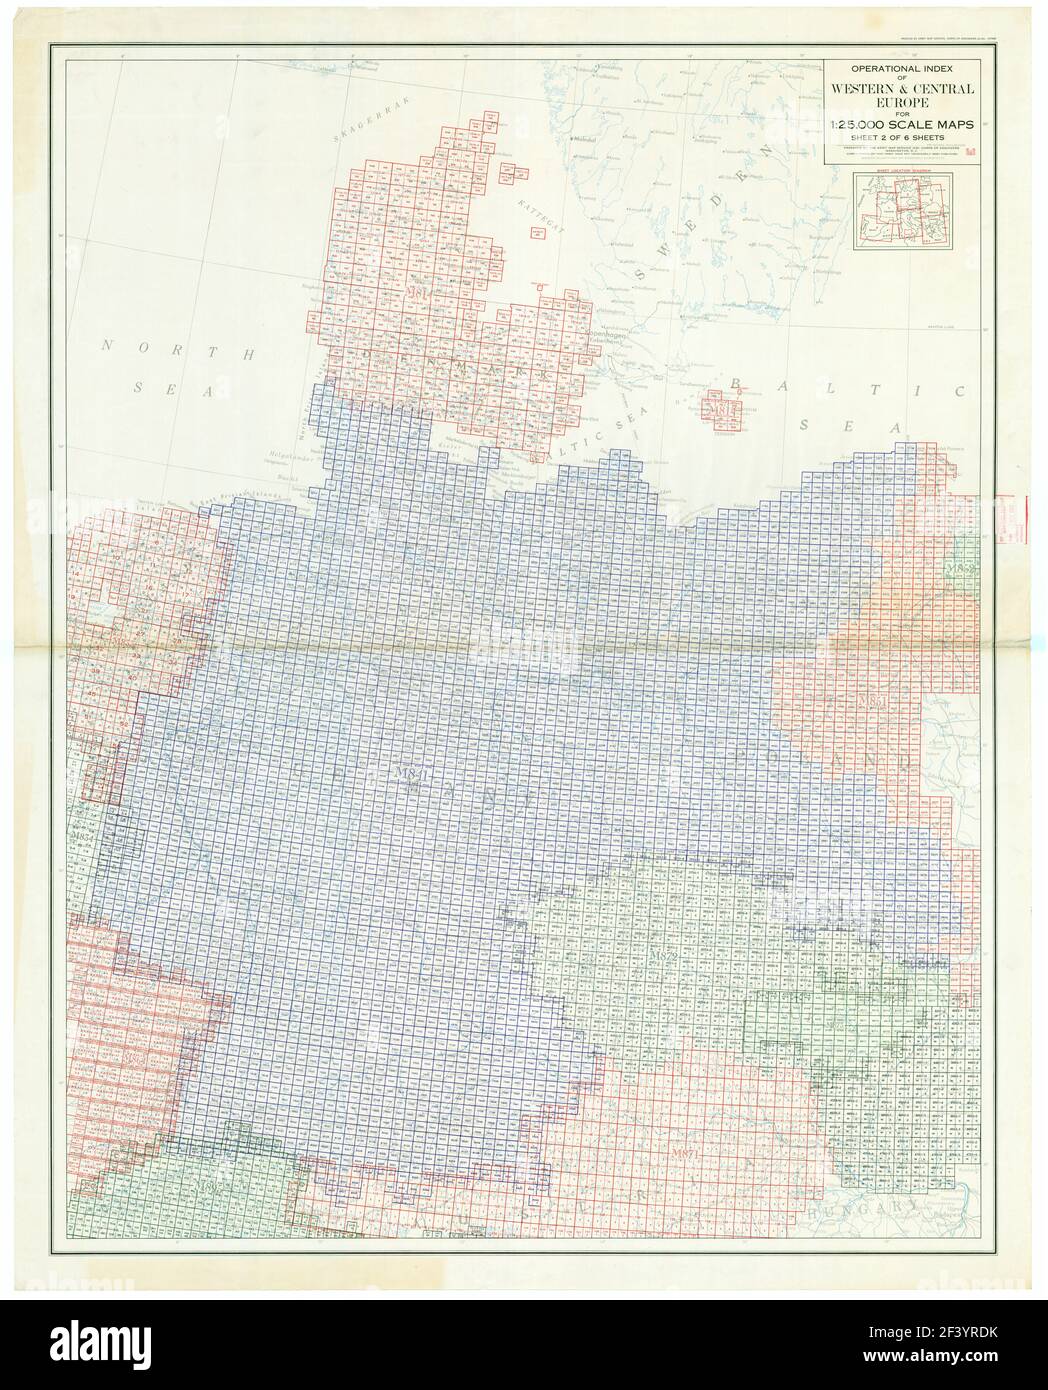 OPS-INDEX WESTERN CENTRAL EUROPE 1953 Stockfoto